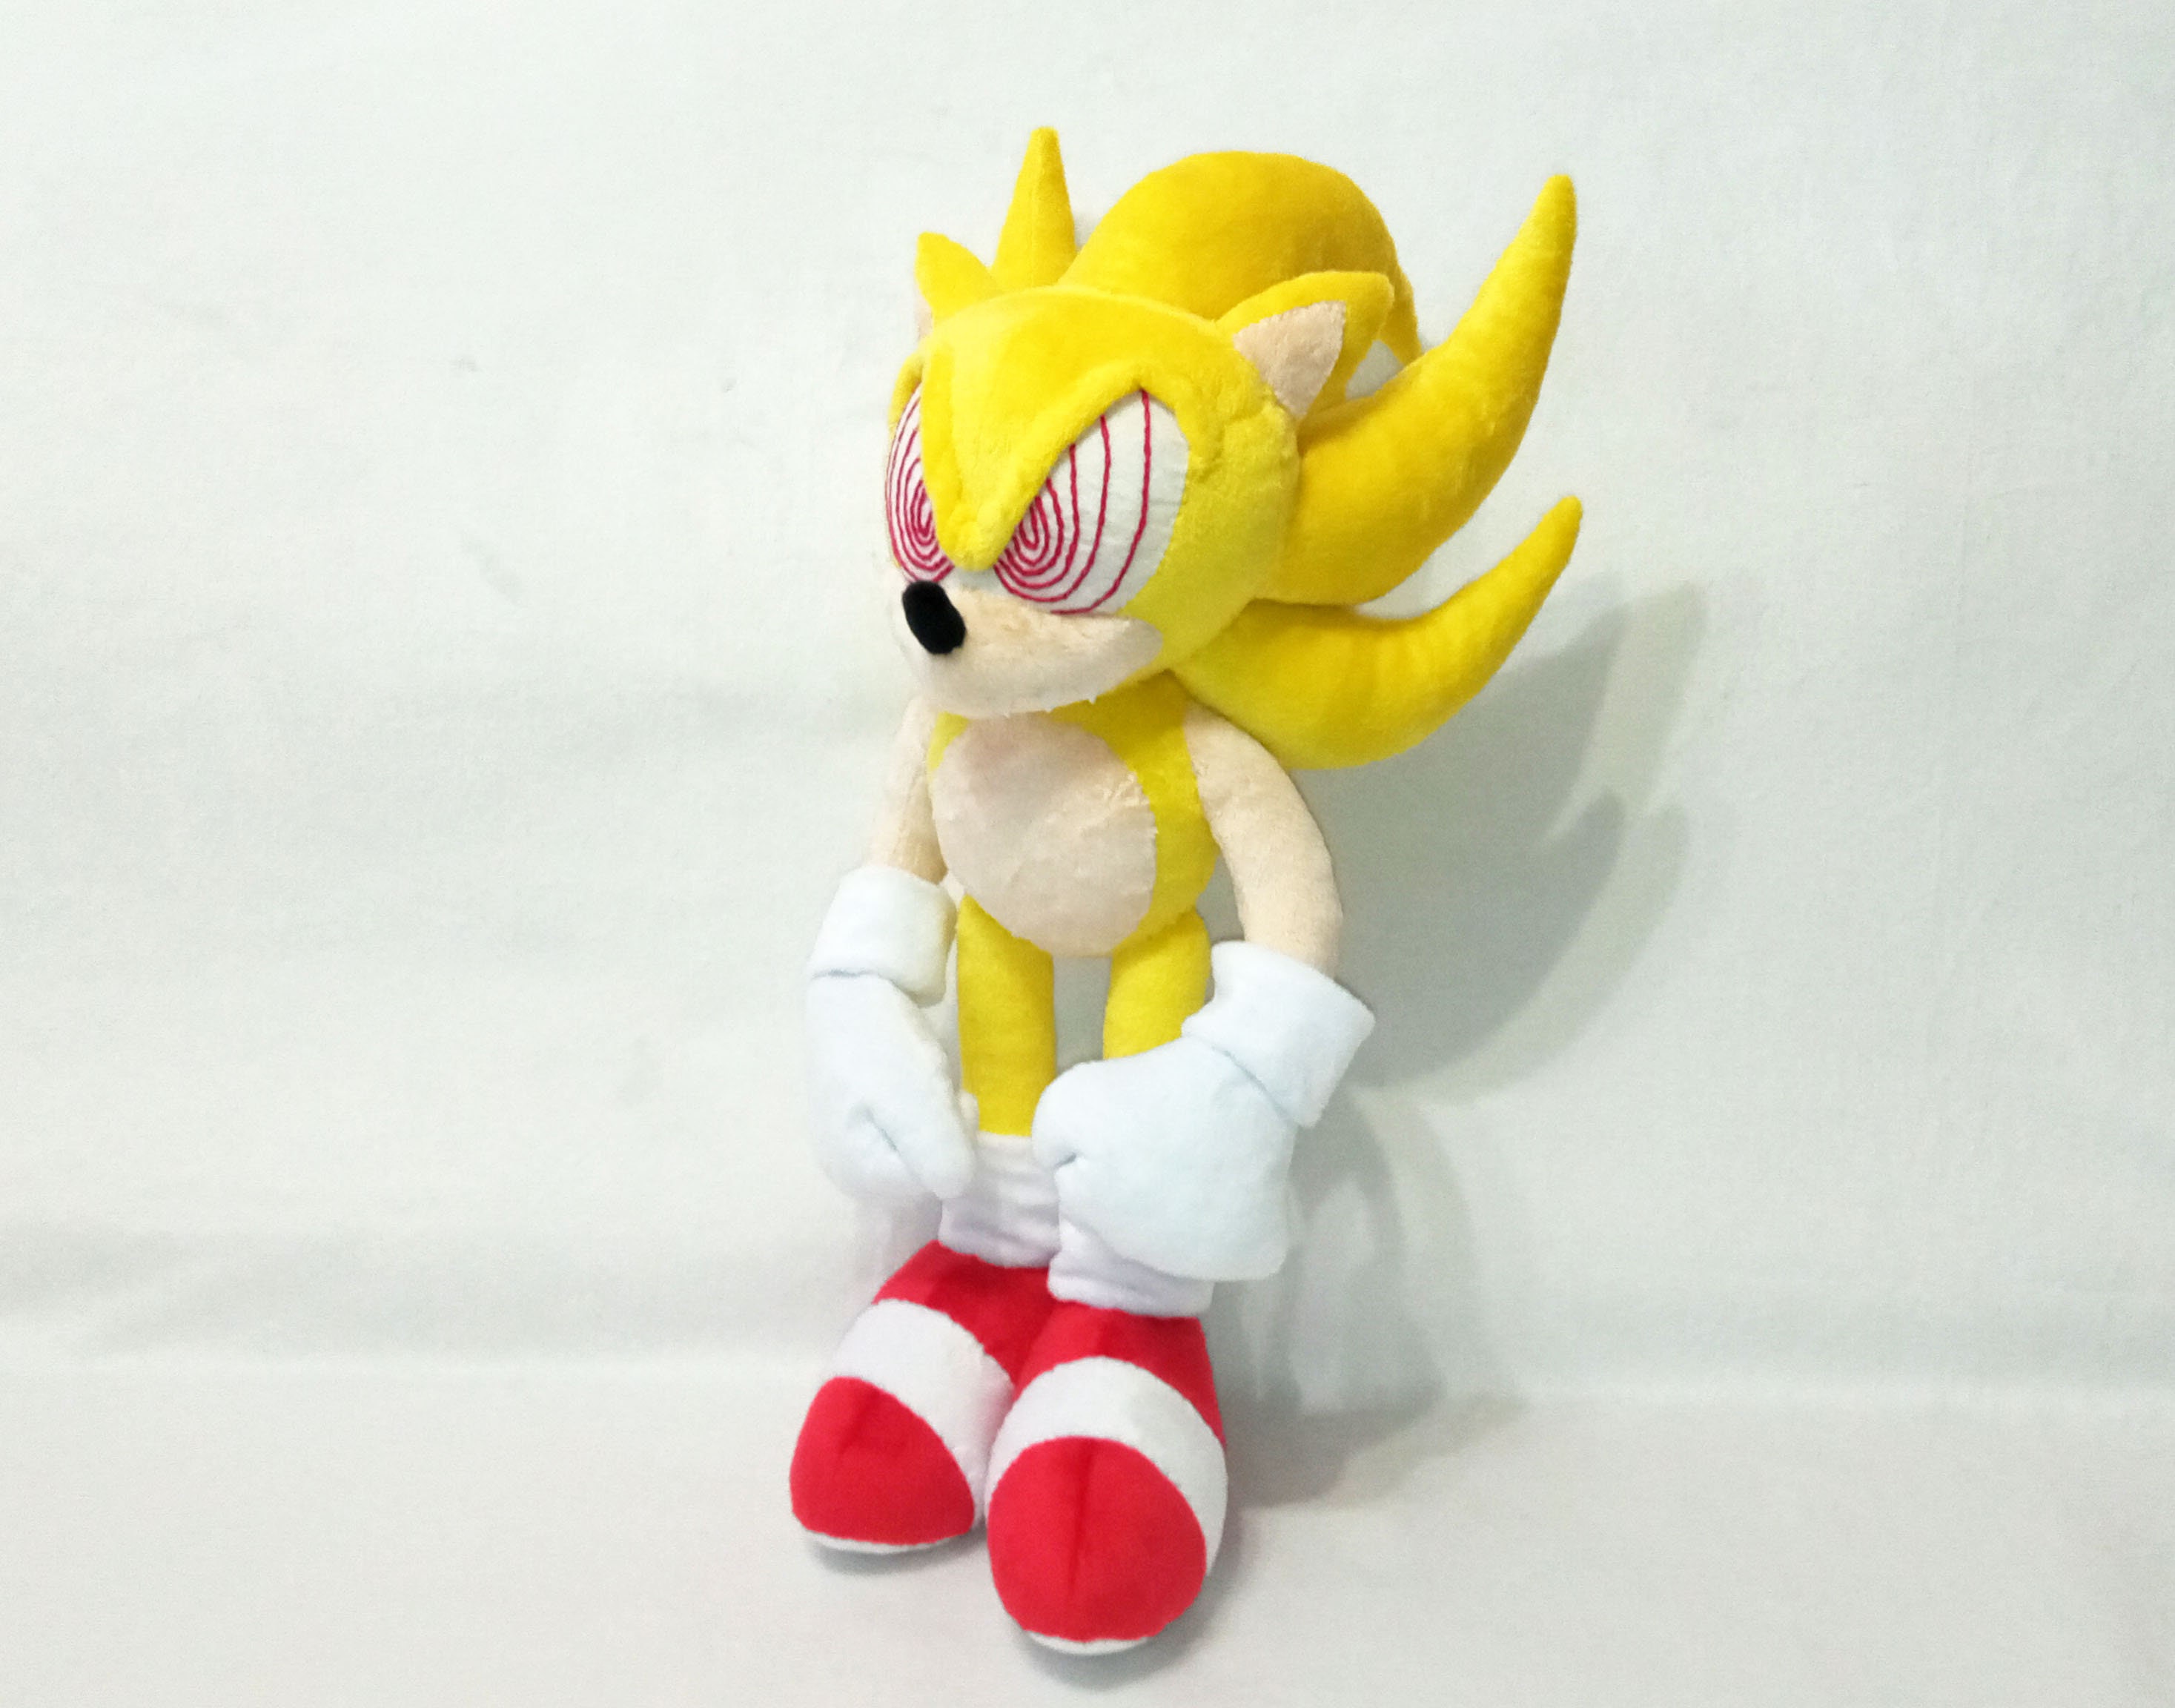 Сustom Plush Just Like Darkspine Sonic and the Secret Rings. Handmade to  Order According to the Pattern Not Official 30-35 Cm. -  Finland